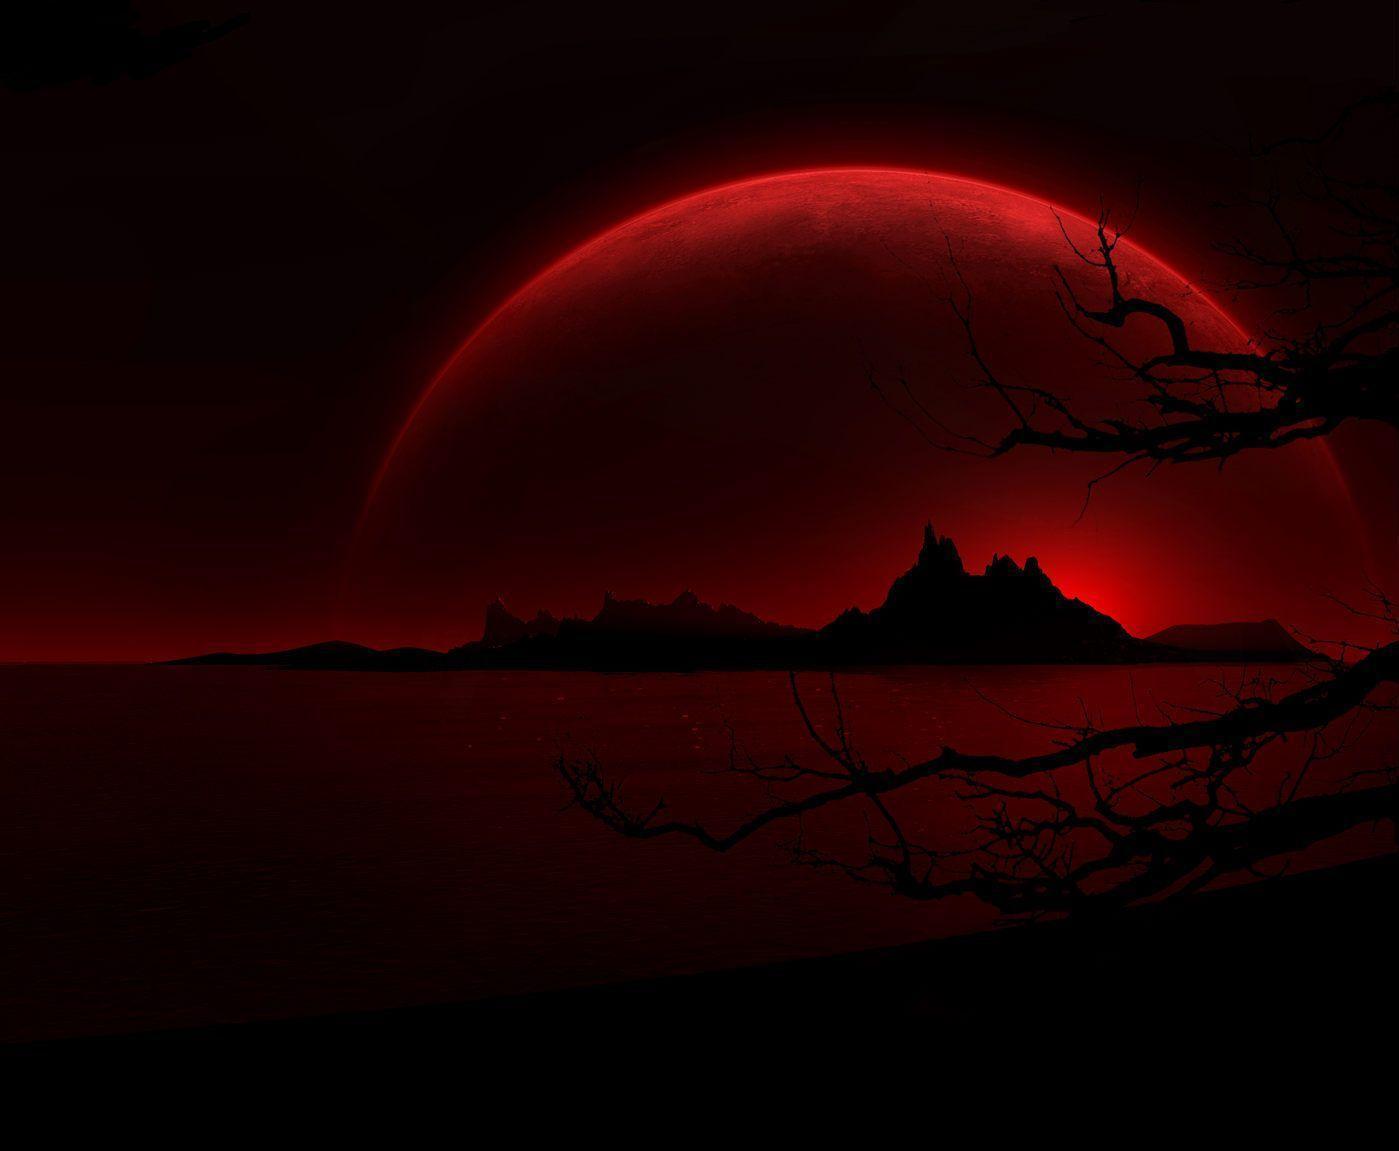 Wallpaper For > Blood Red Moon Wallpaper